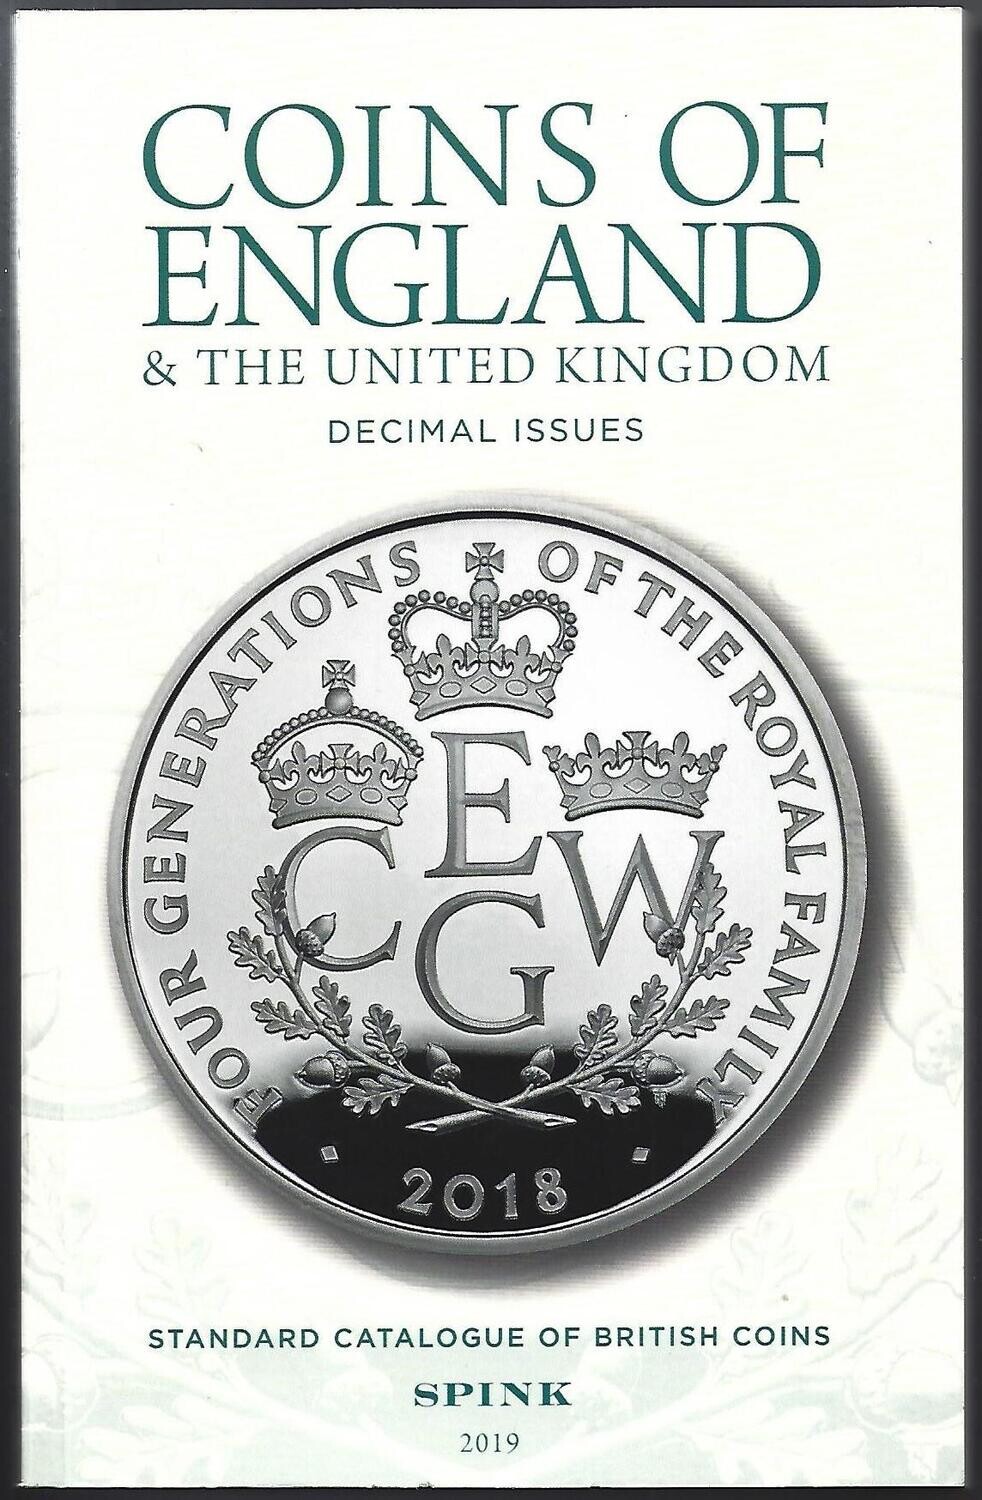 British; Spink & Son, "Coins of England and the United Kingdom - Decimal Issues", 2019.